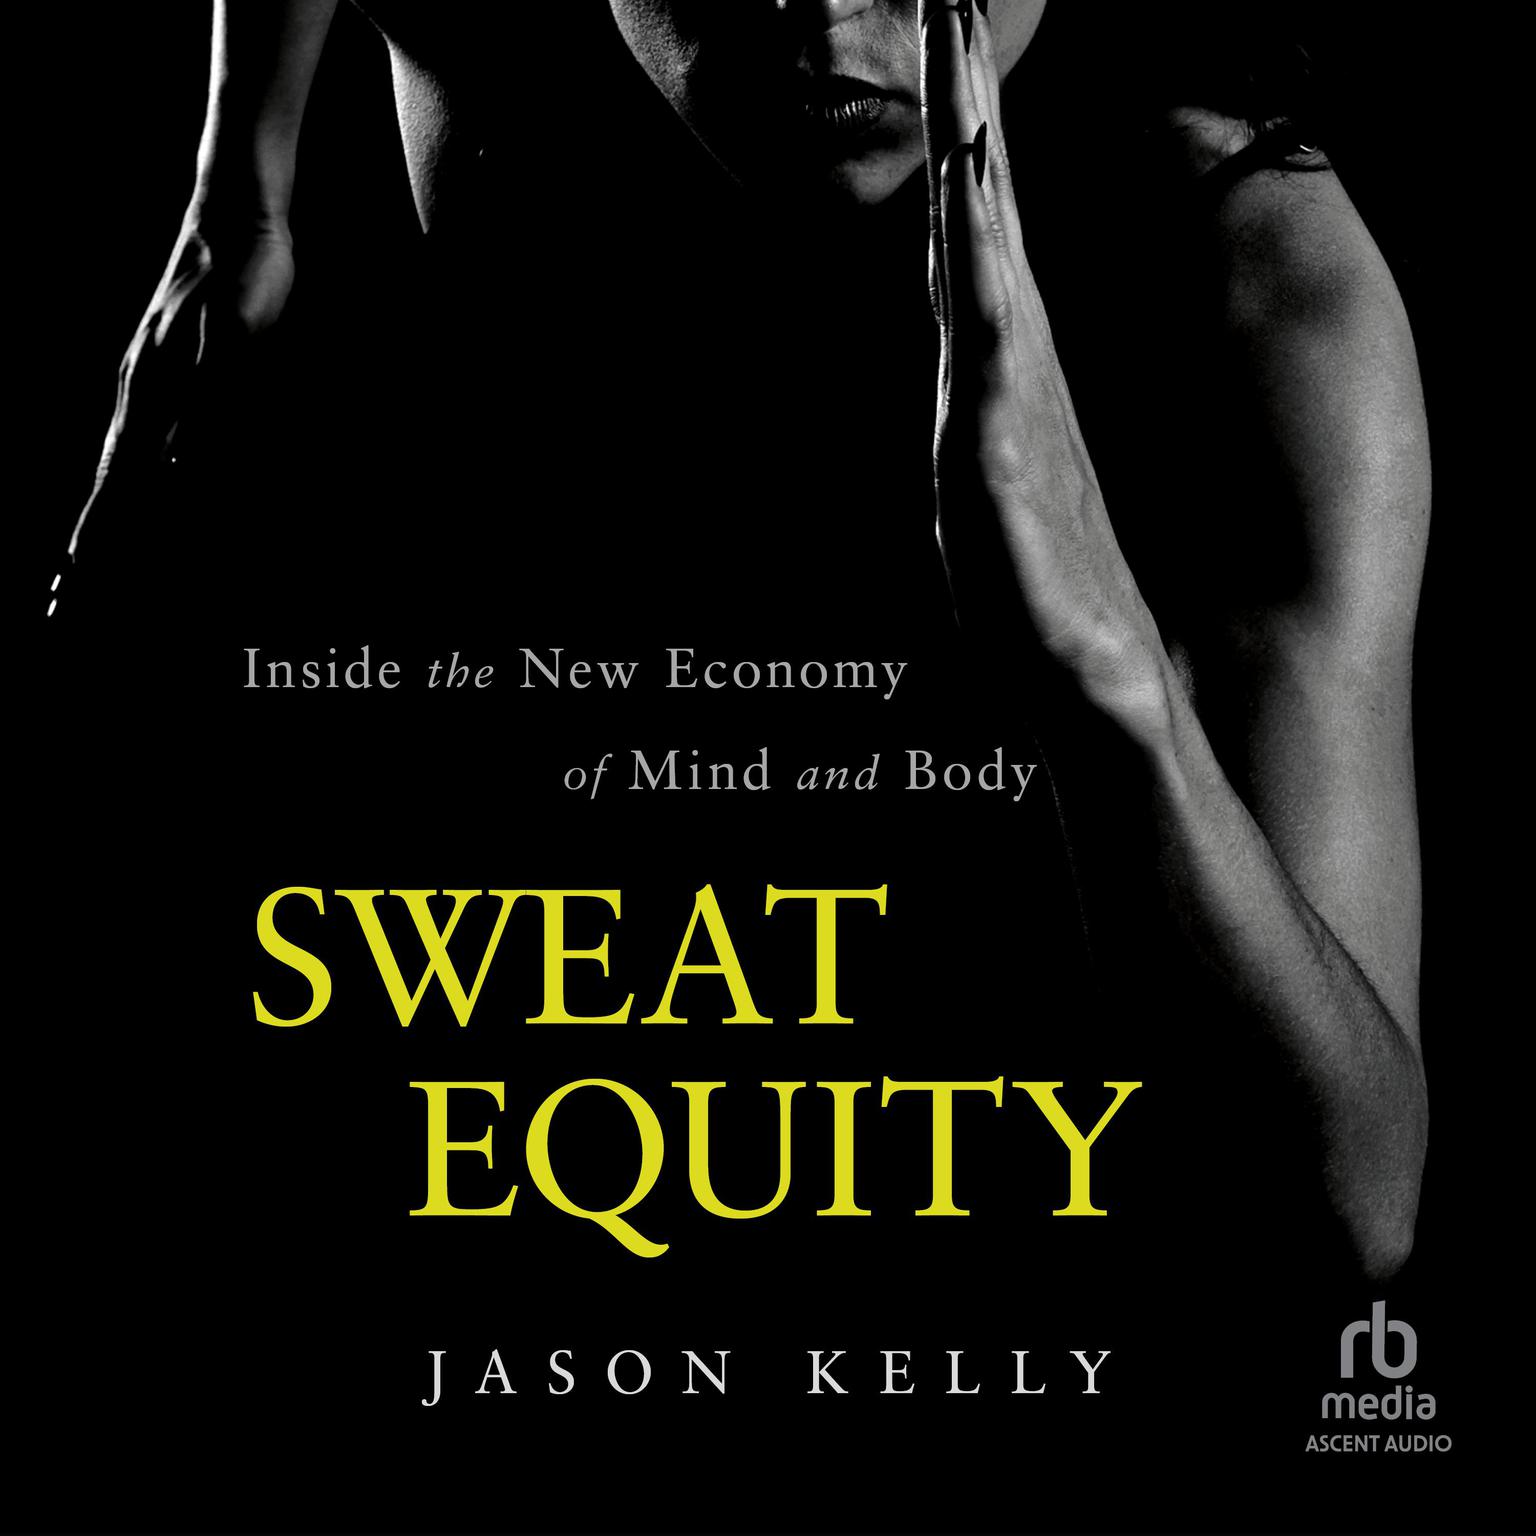 Sweat Equity: Inside the New Economy of Mind and Body Audiobook, by Jason Kelly